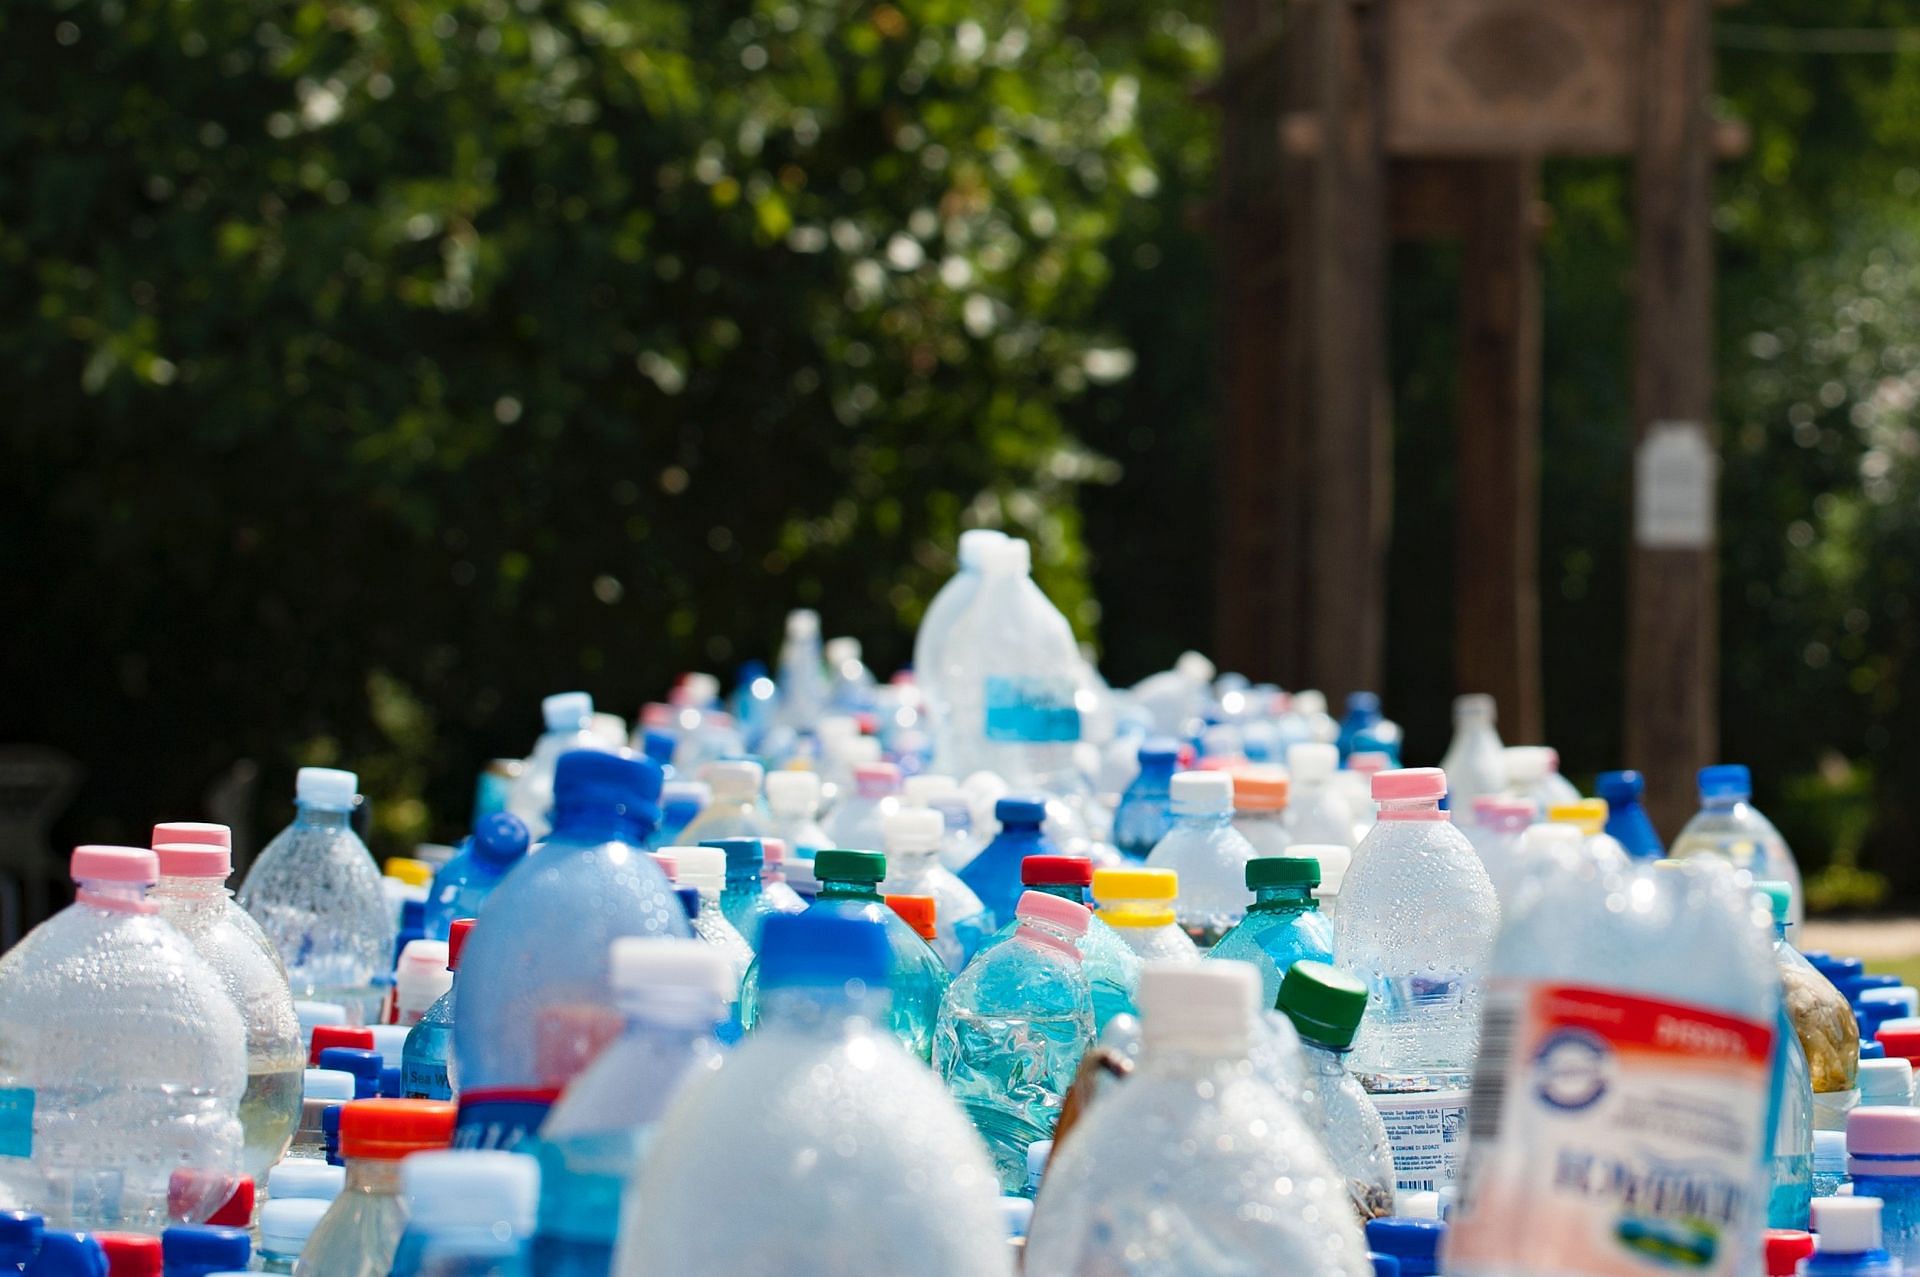 Plastics are a leading cause of lower testosterone in men (Image via Pexels @Mali Maeder)